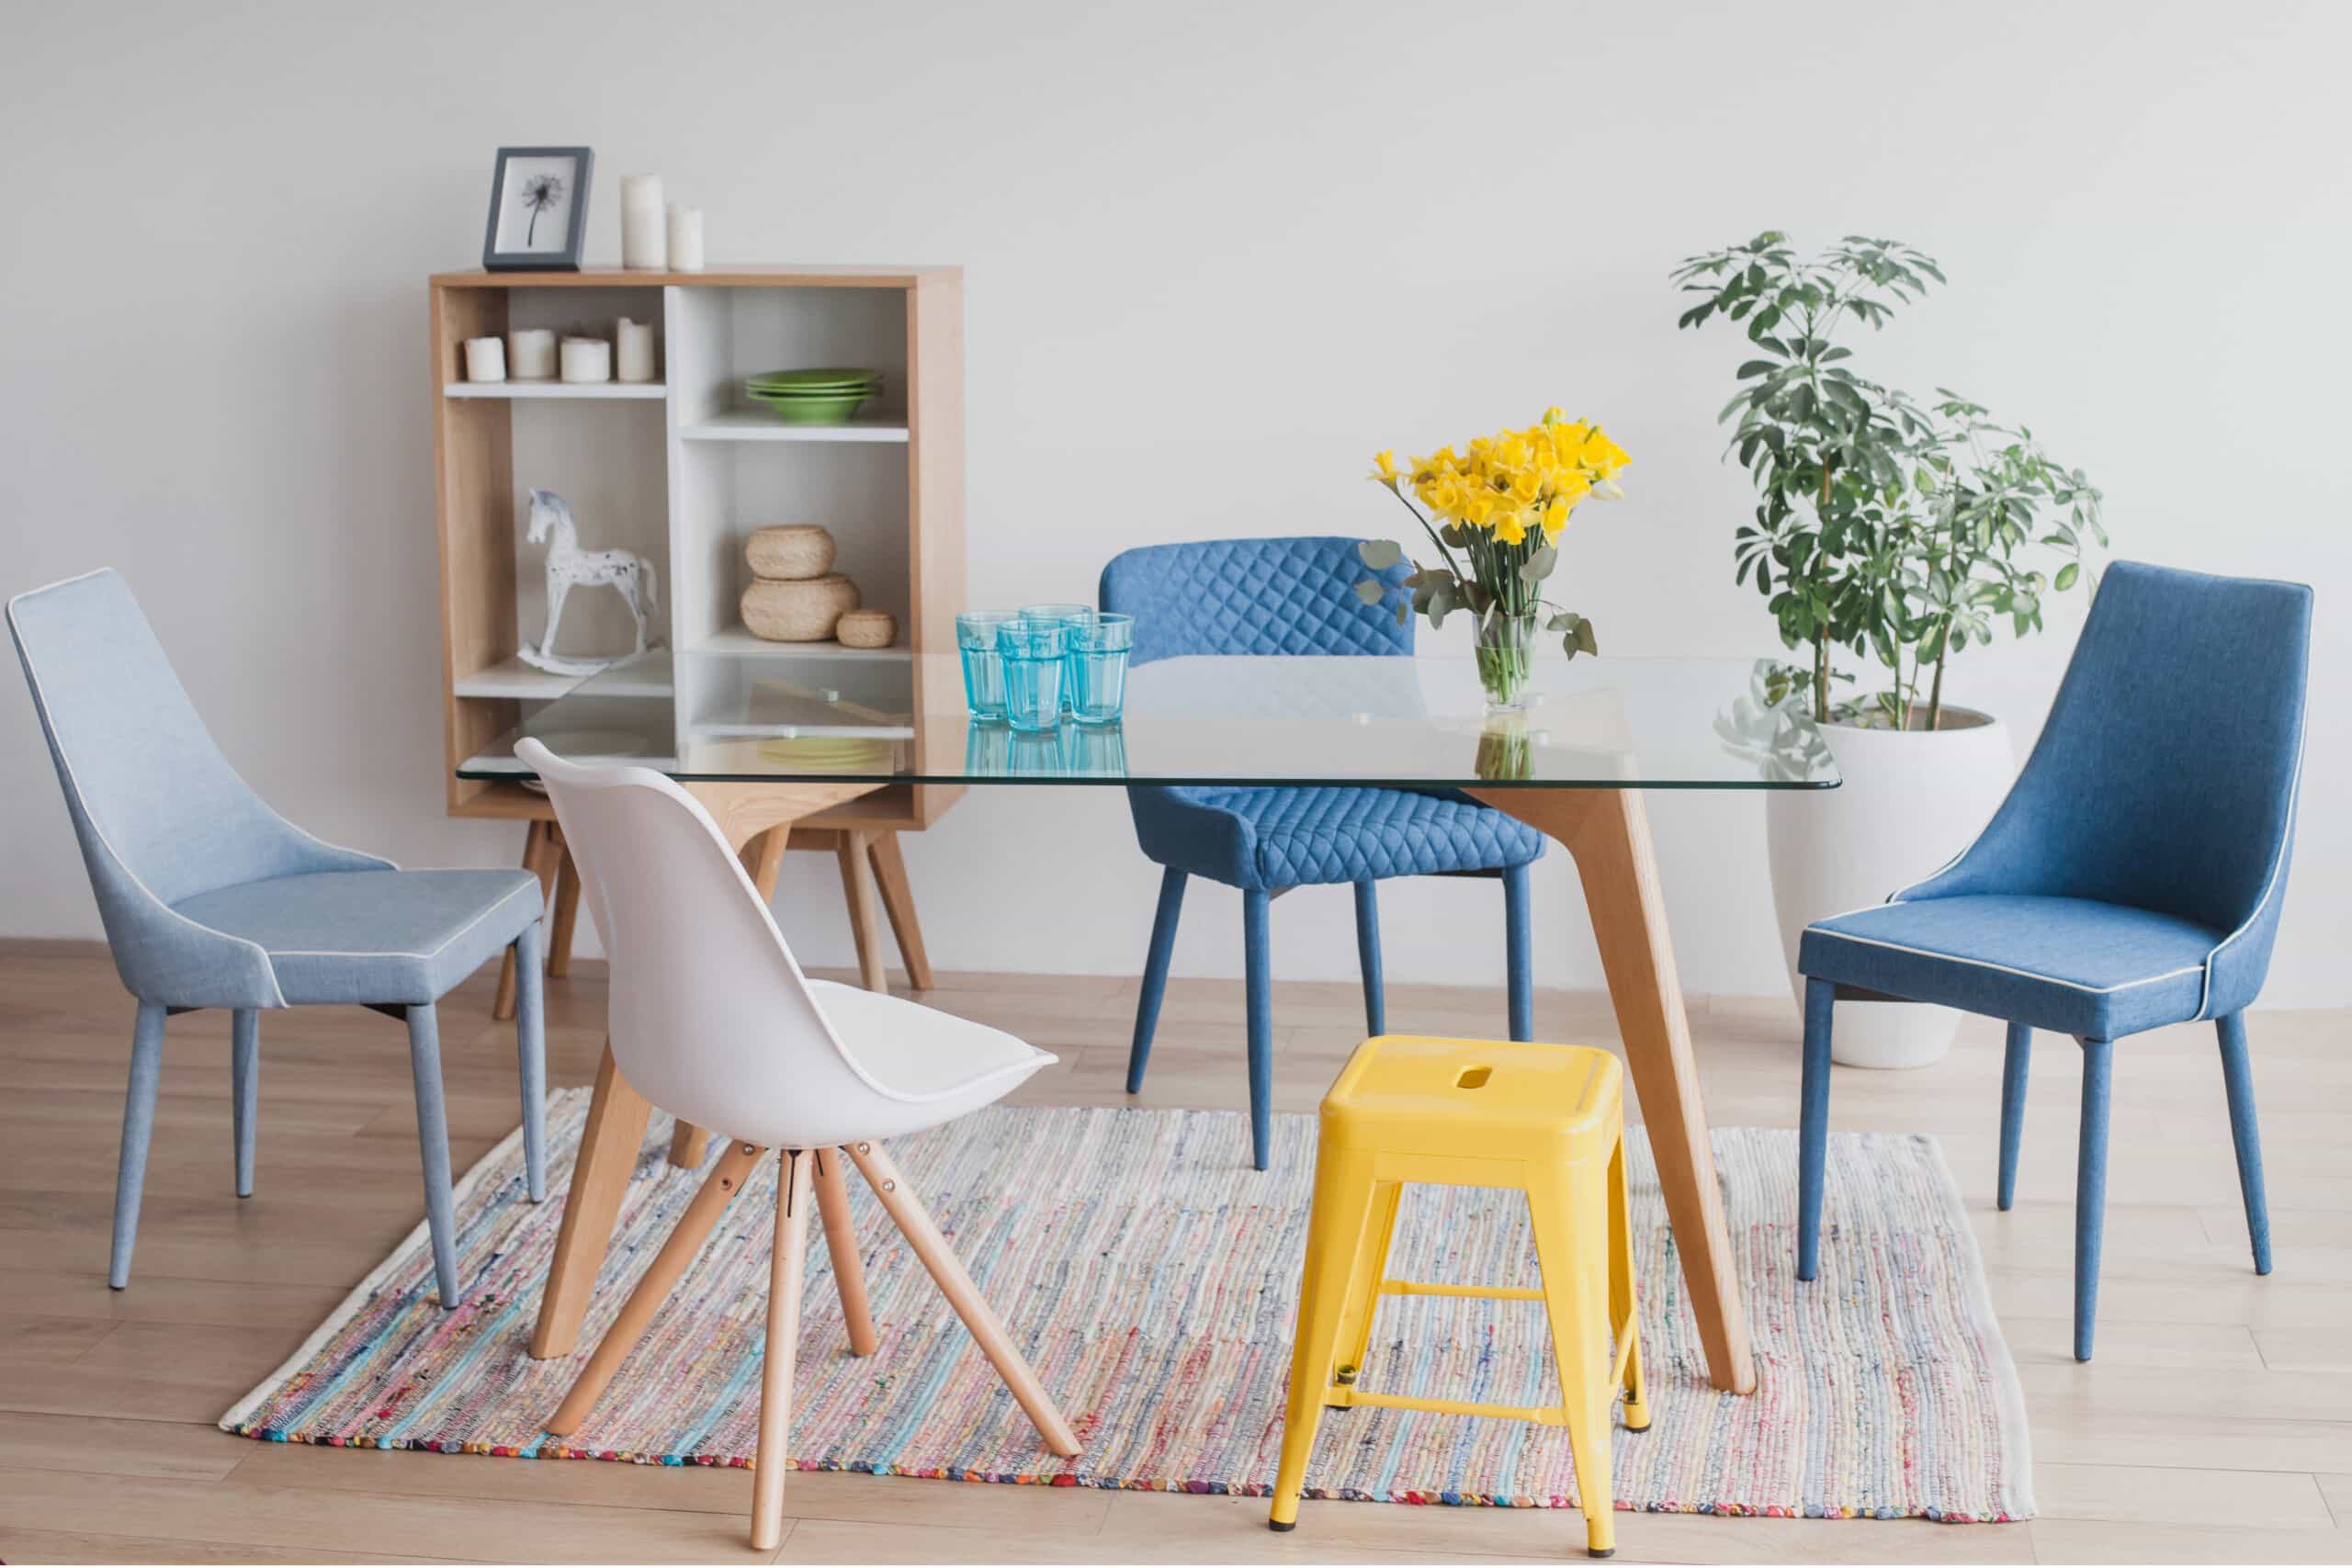 how to choose a dining room table